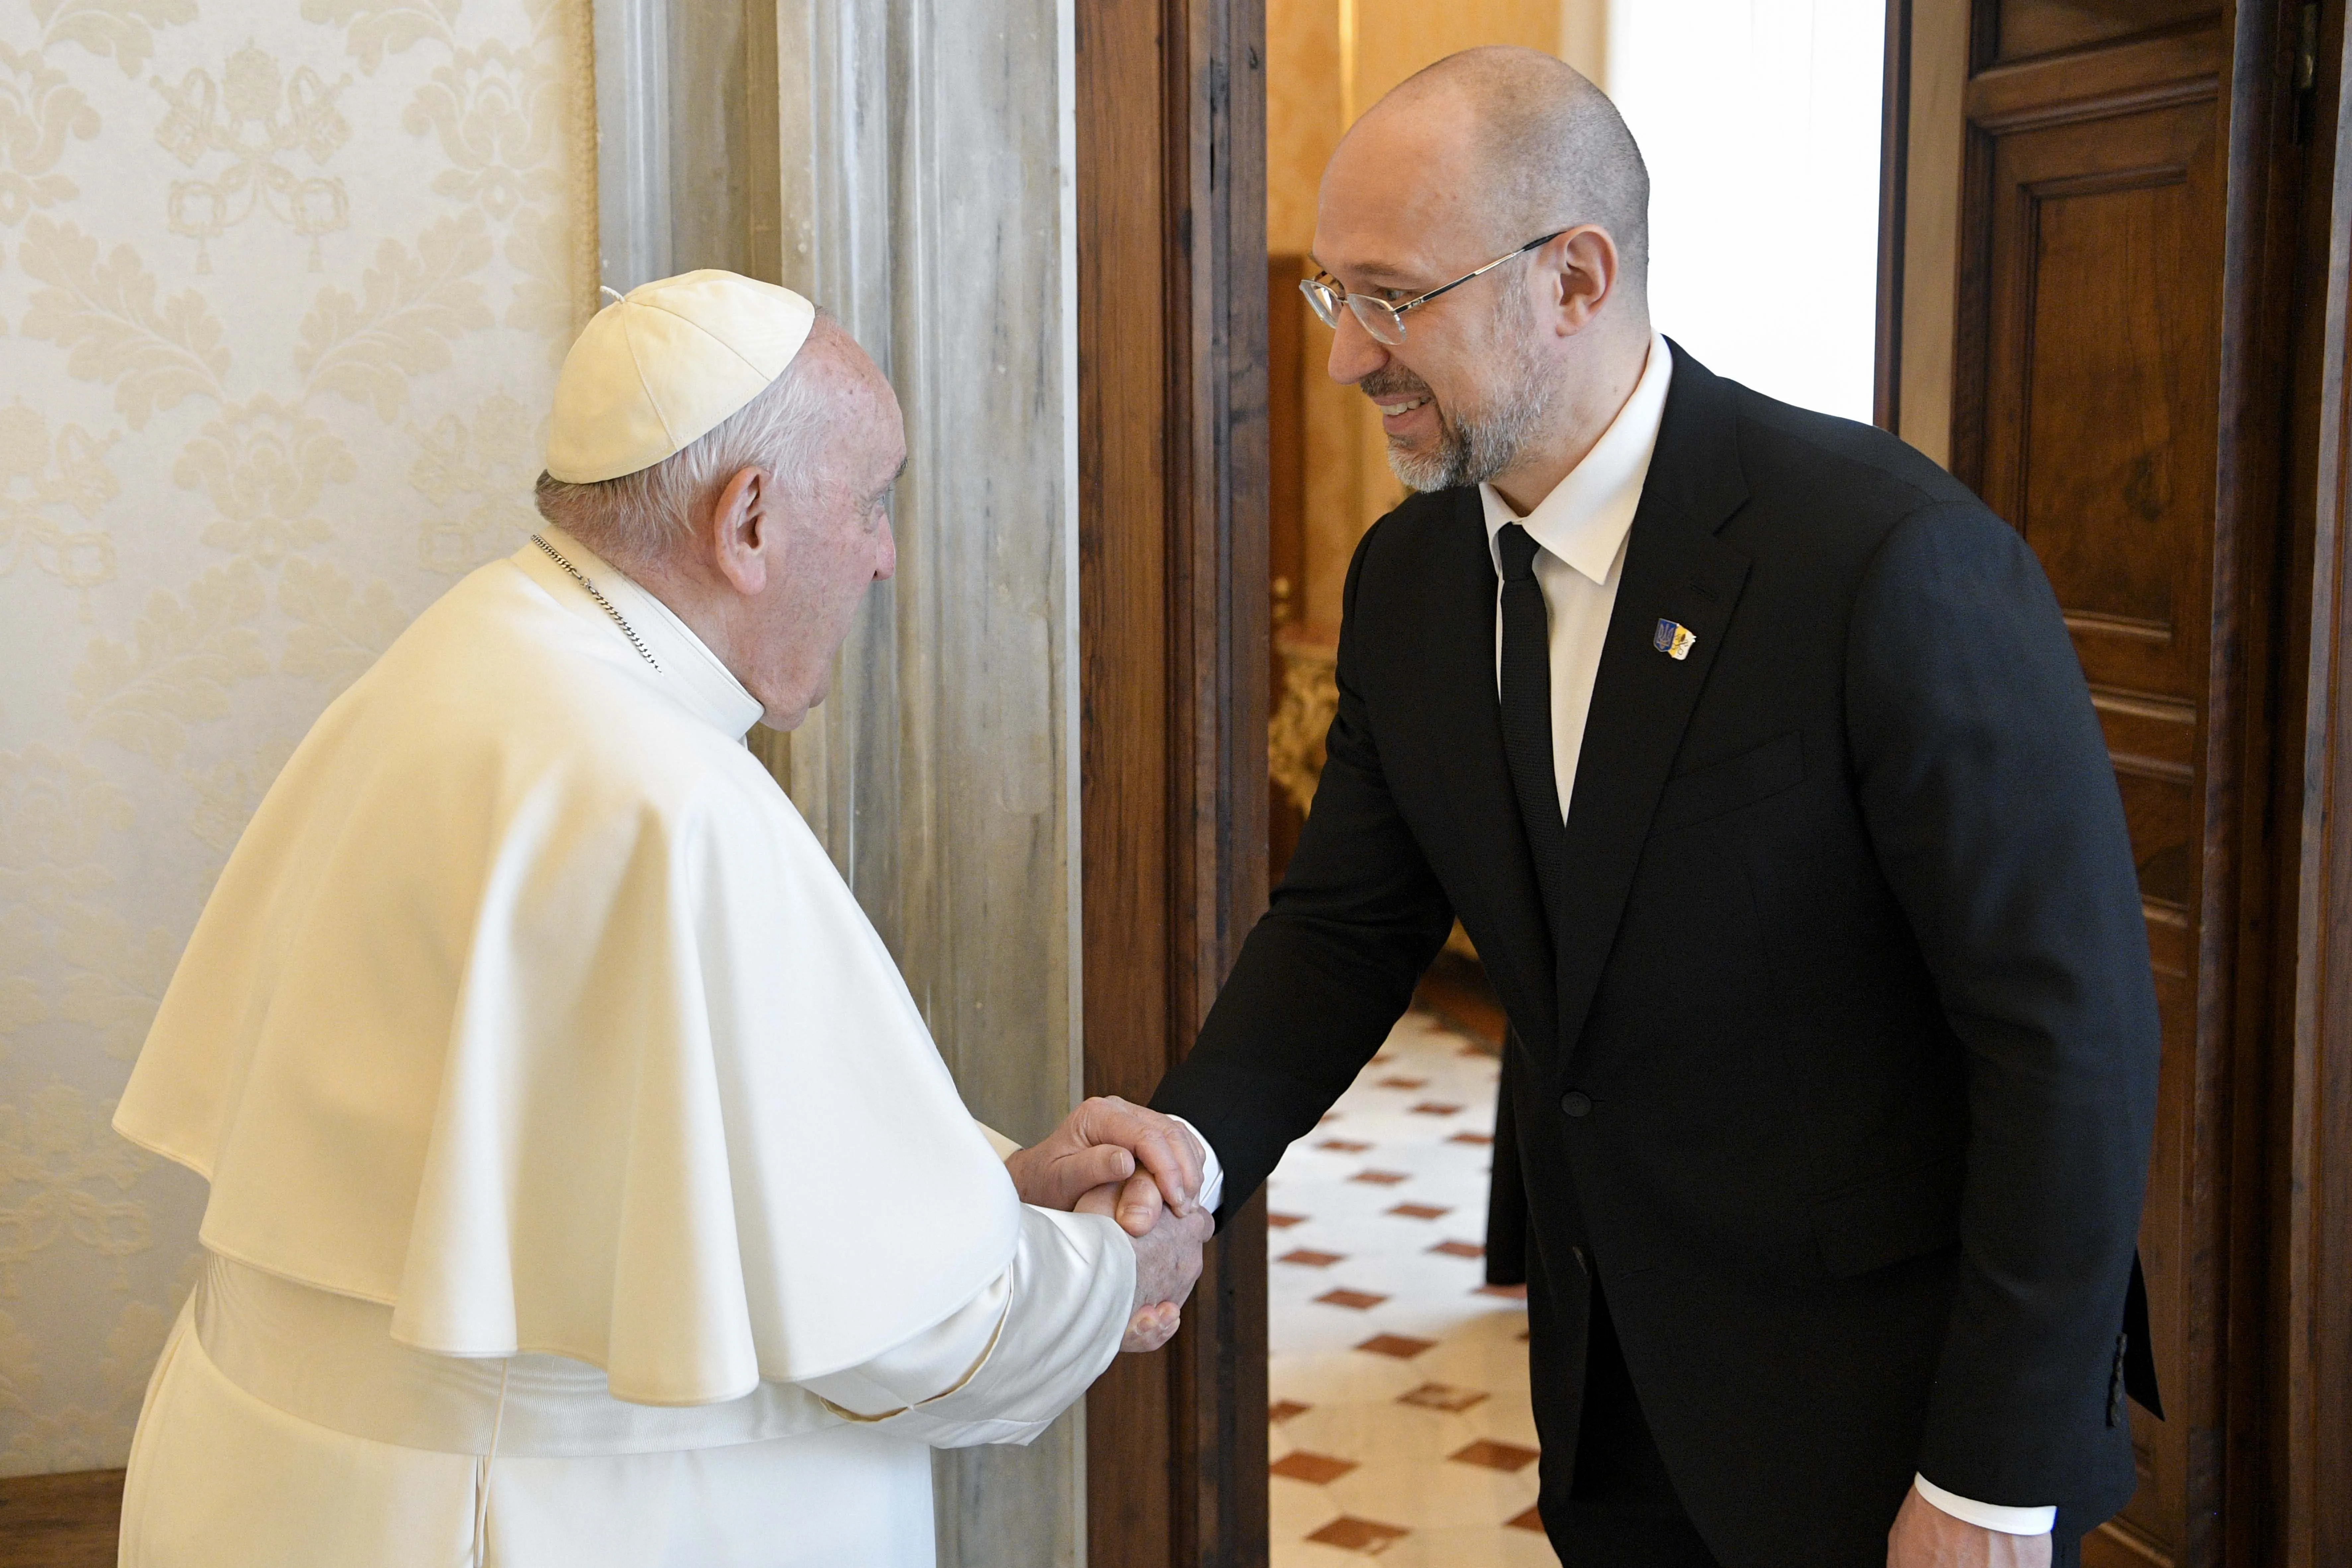 Ukraine Prime Minister Denys Shmyhal meets Pope Francis in a private, 30-minute encounter at the Vatican on the morning of April 27, 2023.?w=200&h=150